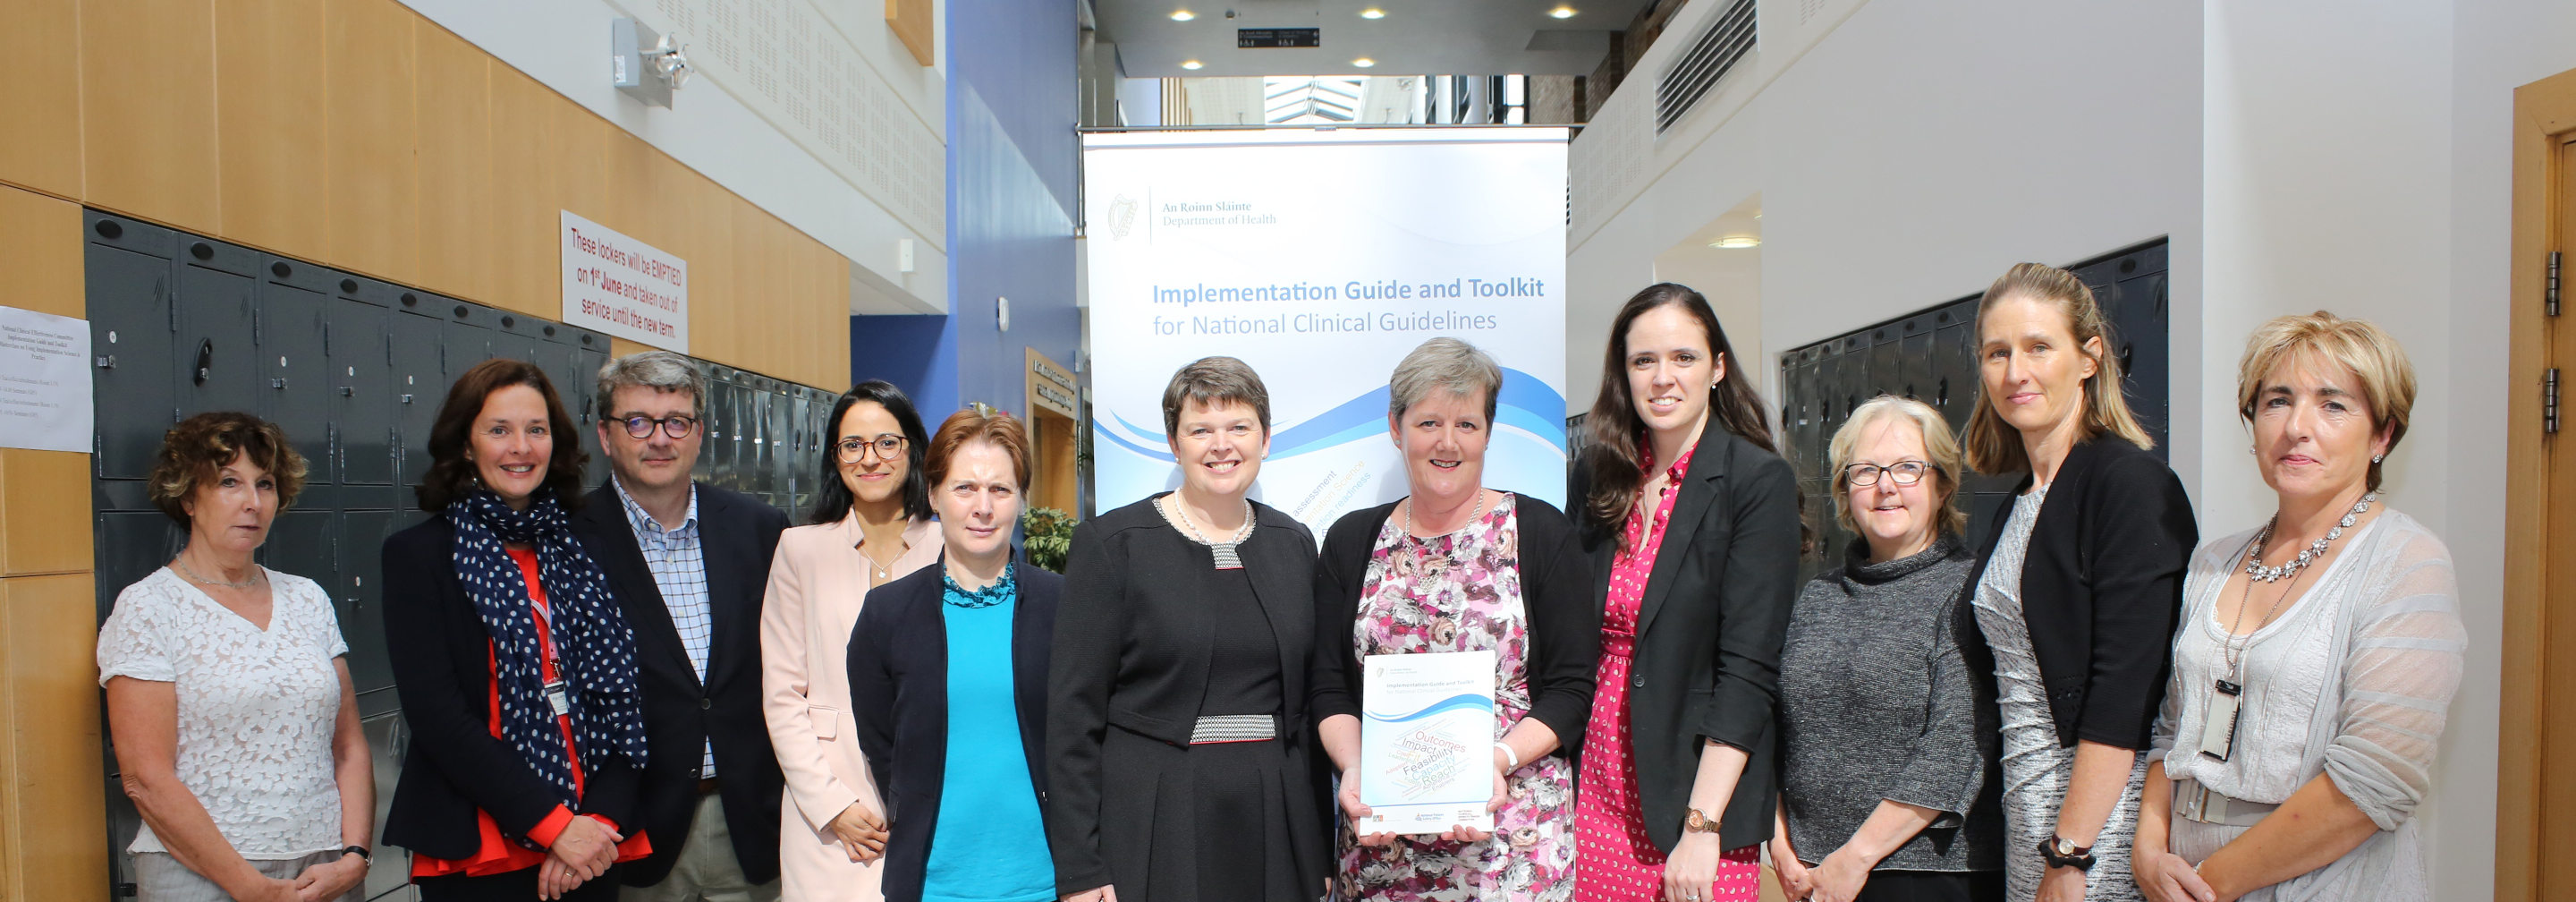 Launch of Implementation Guide